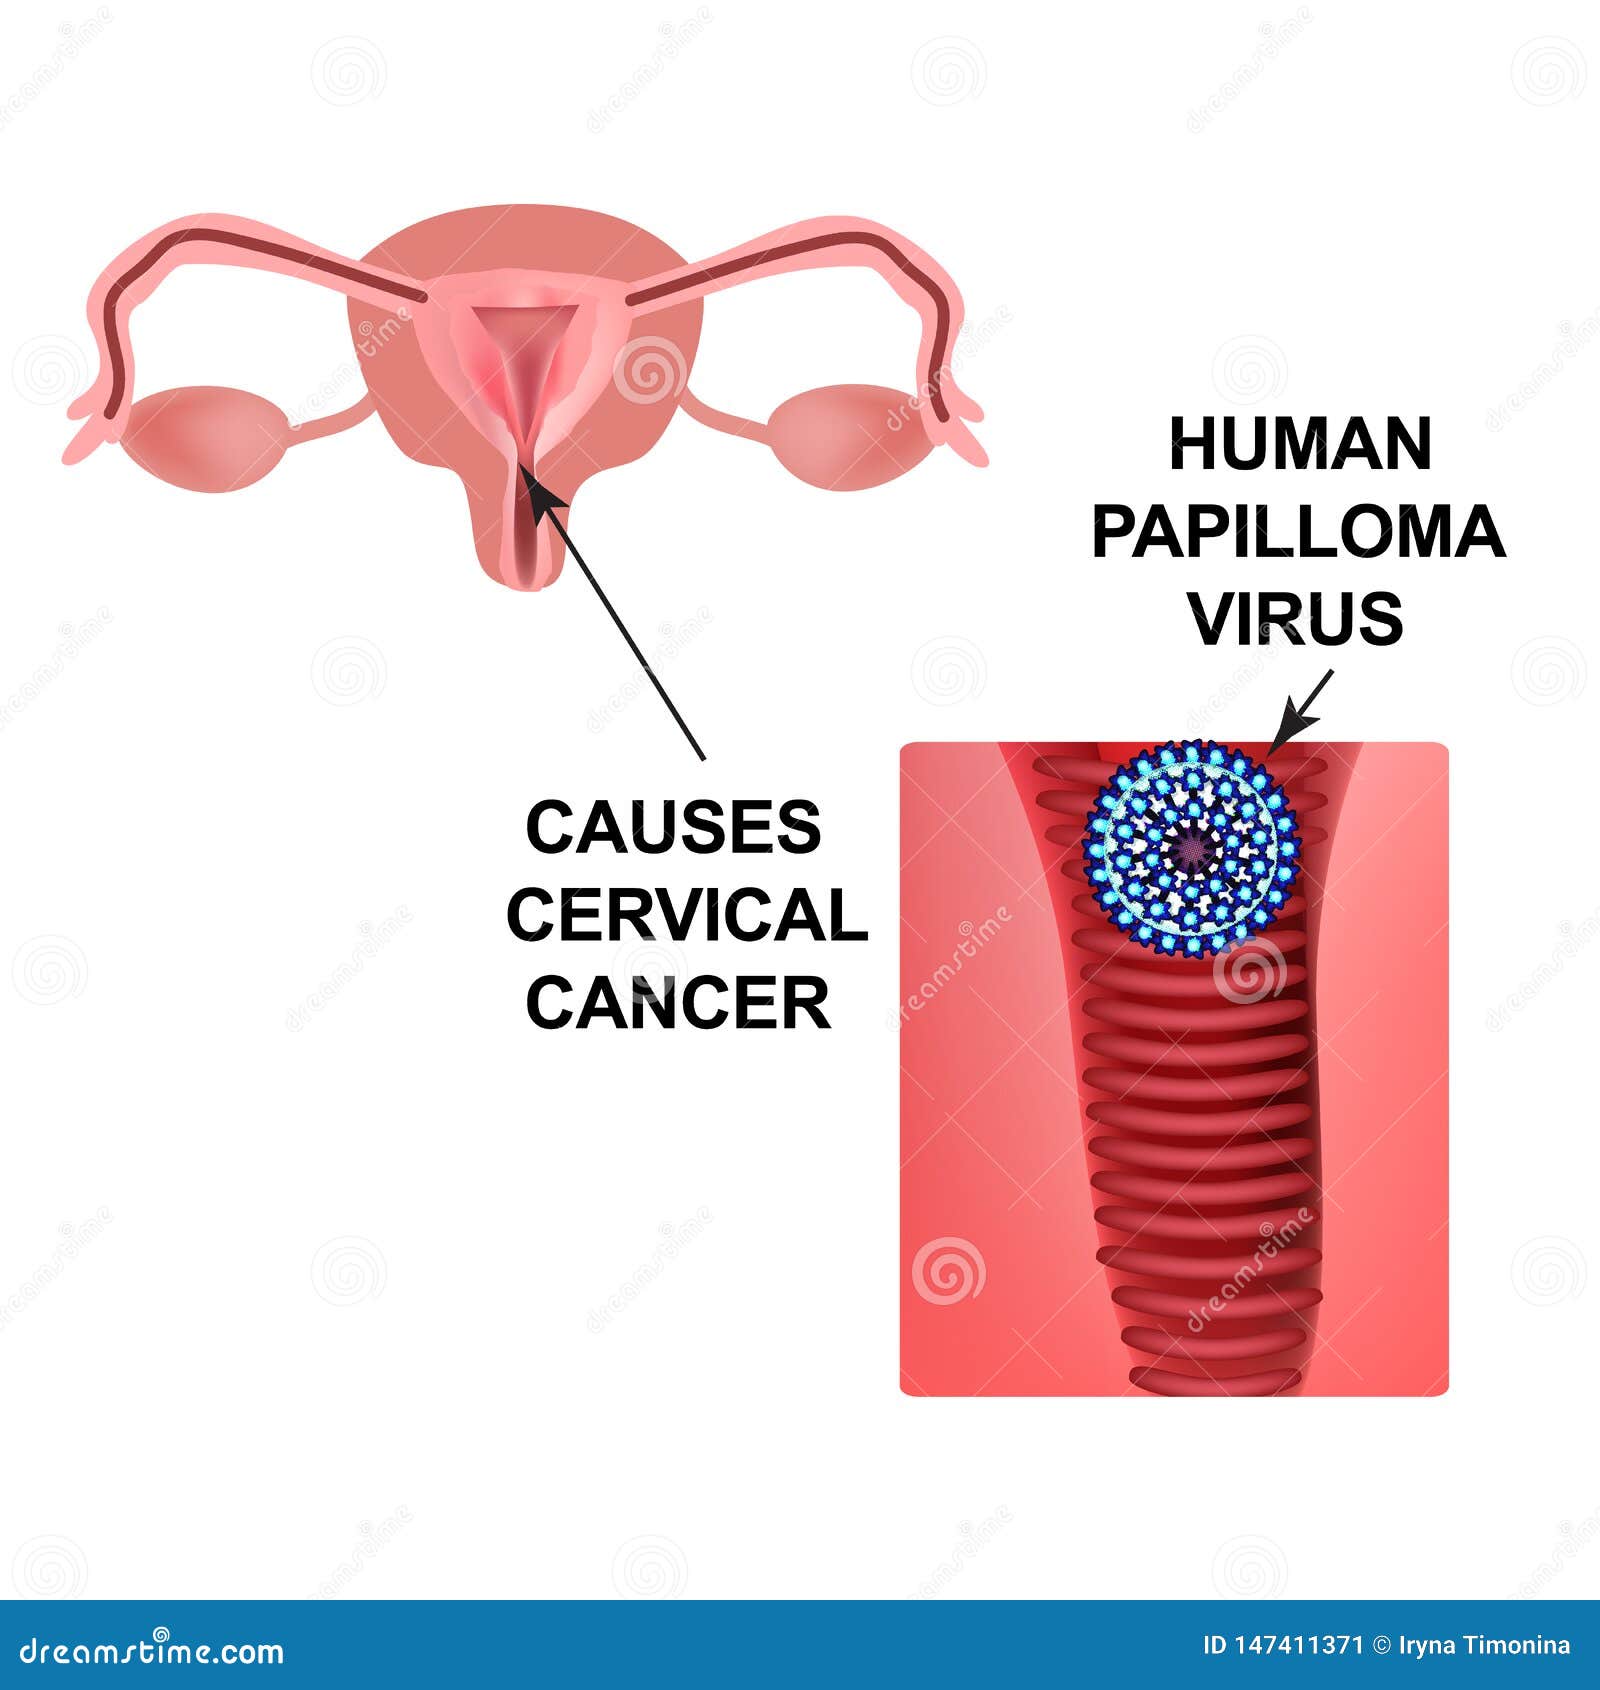 Hpv virus causes warts Papillomavirus causes, How does hpv cause cancer